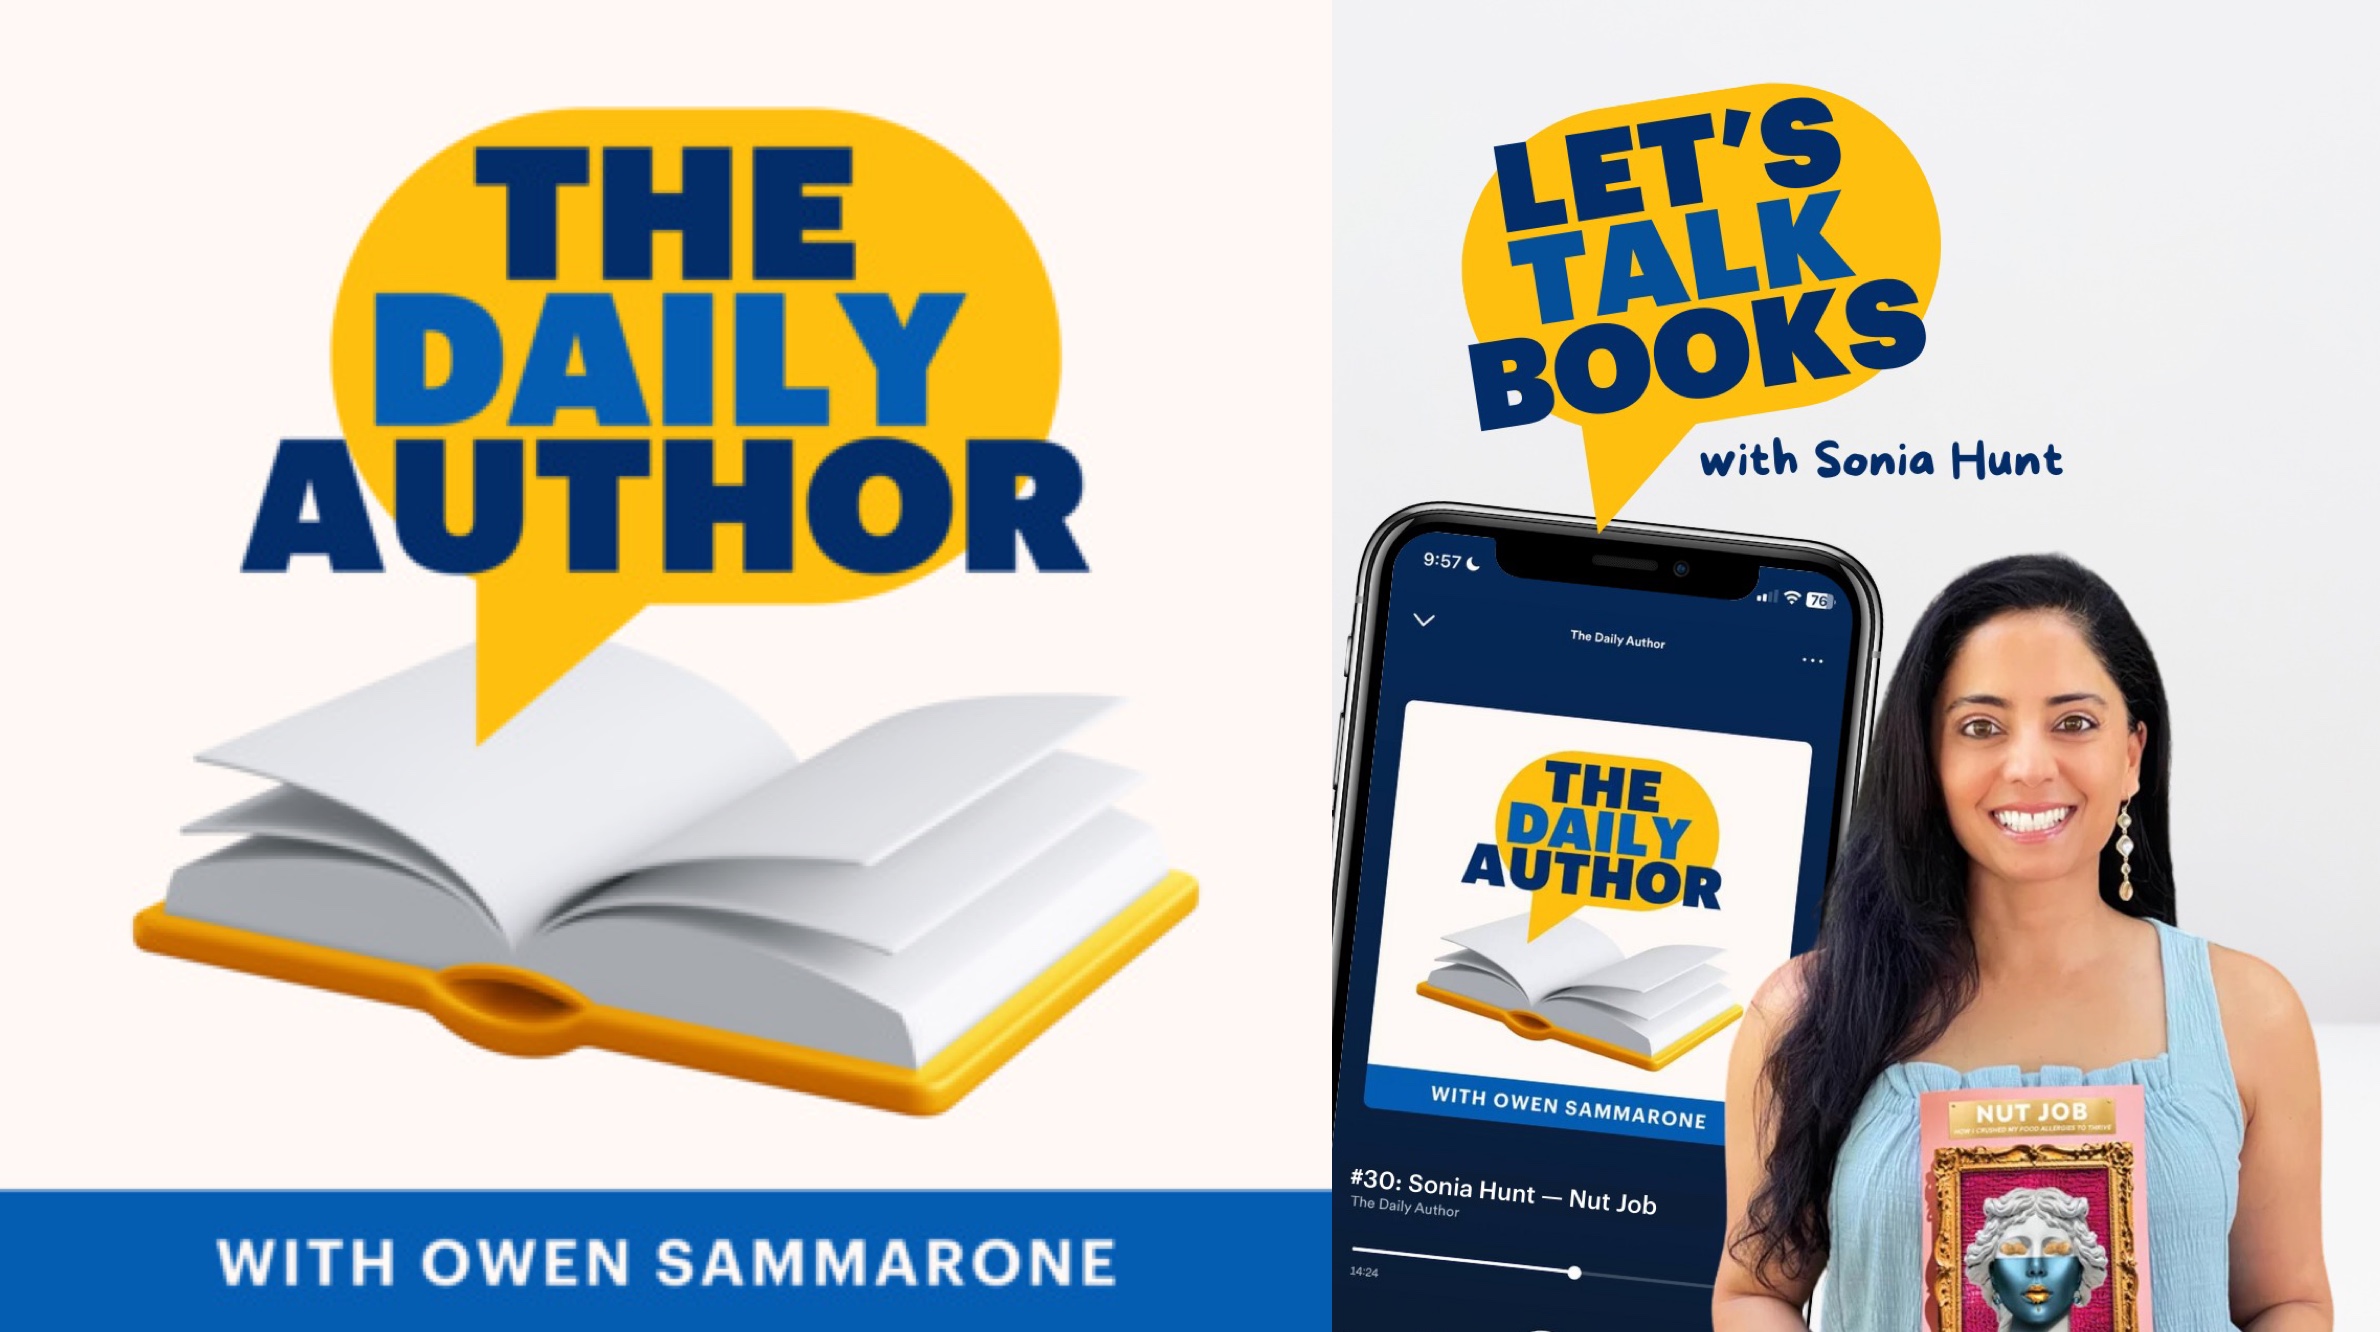 The Daily Author Podcast Interview with Sonia Hunt